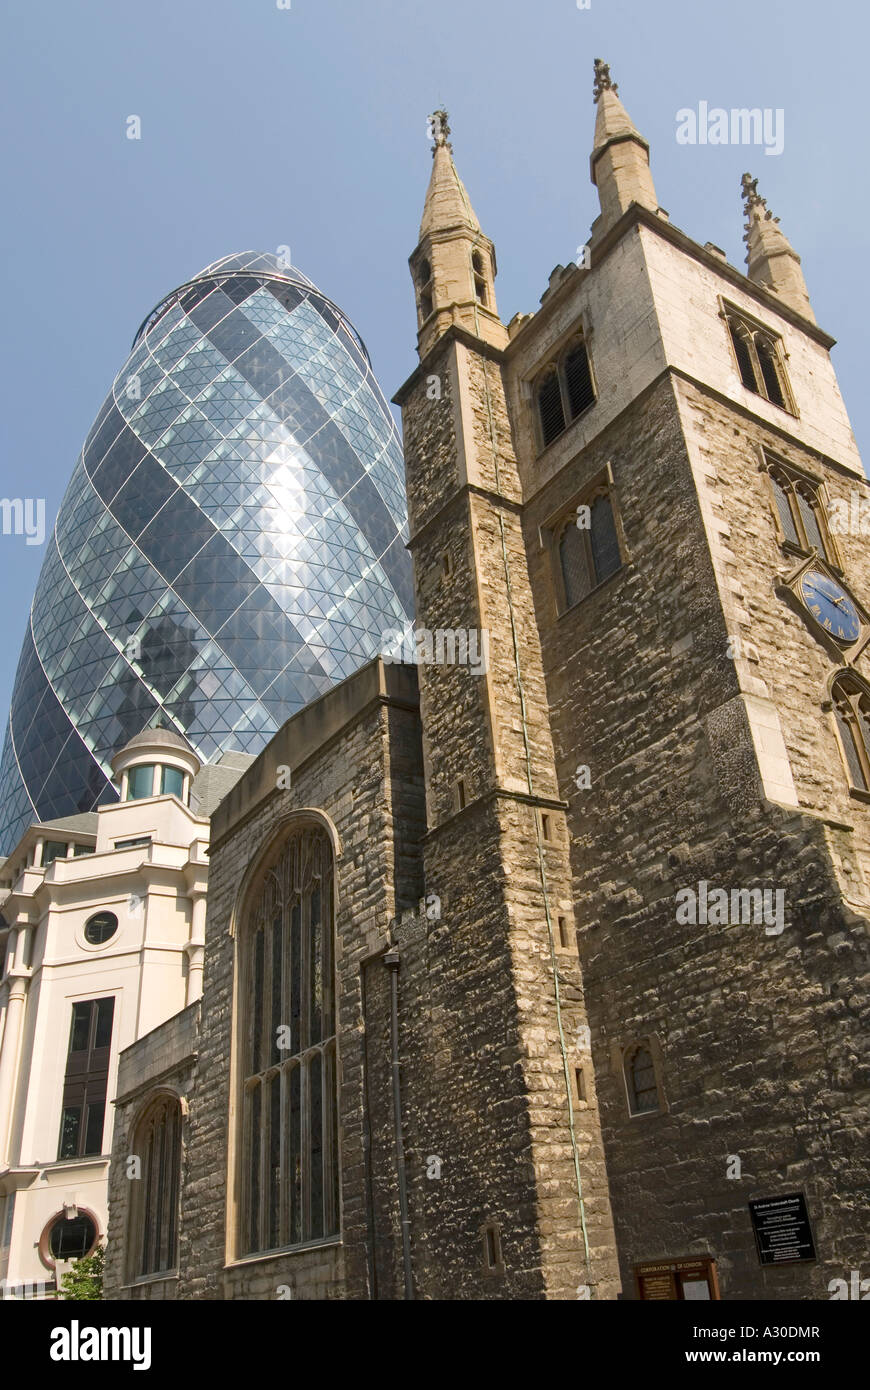 City of London ancient and modern view skywards of the tower of St Andrew Undershaft Church and the Gherkin office tower Stock Photo